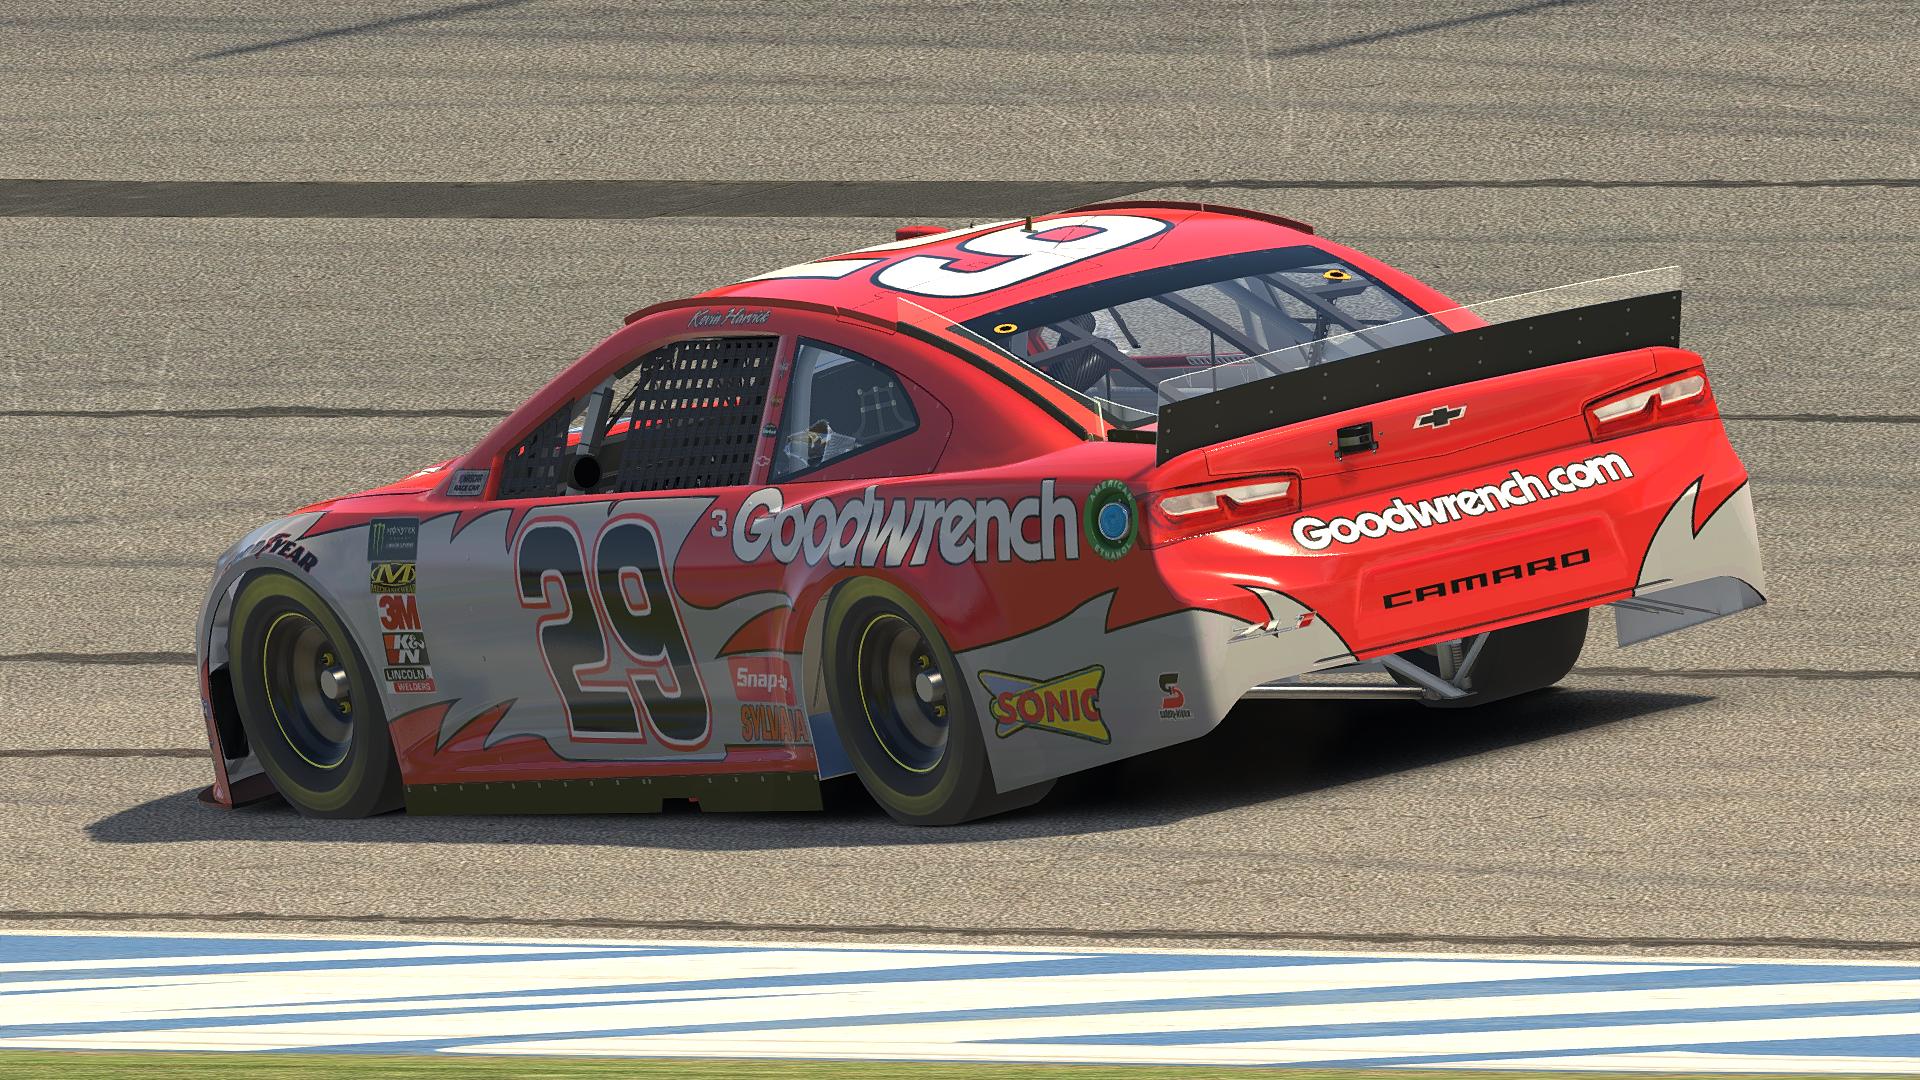 Preview of Kevin Harvick 2003 Goodwrench (Budweiser Shootout) by Ryan B.